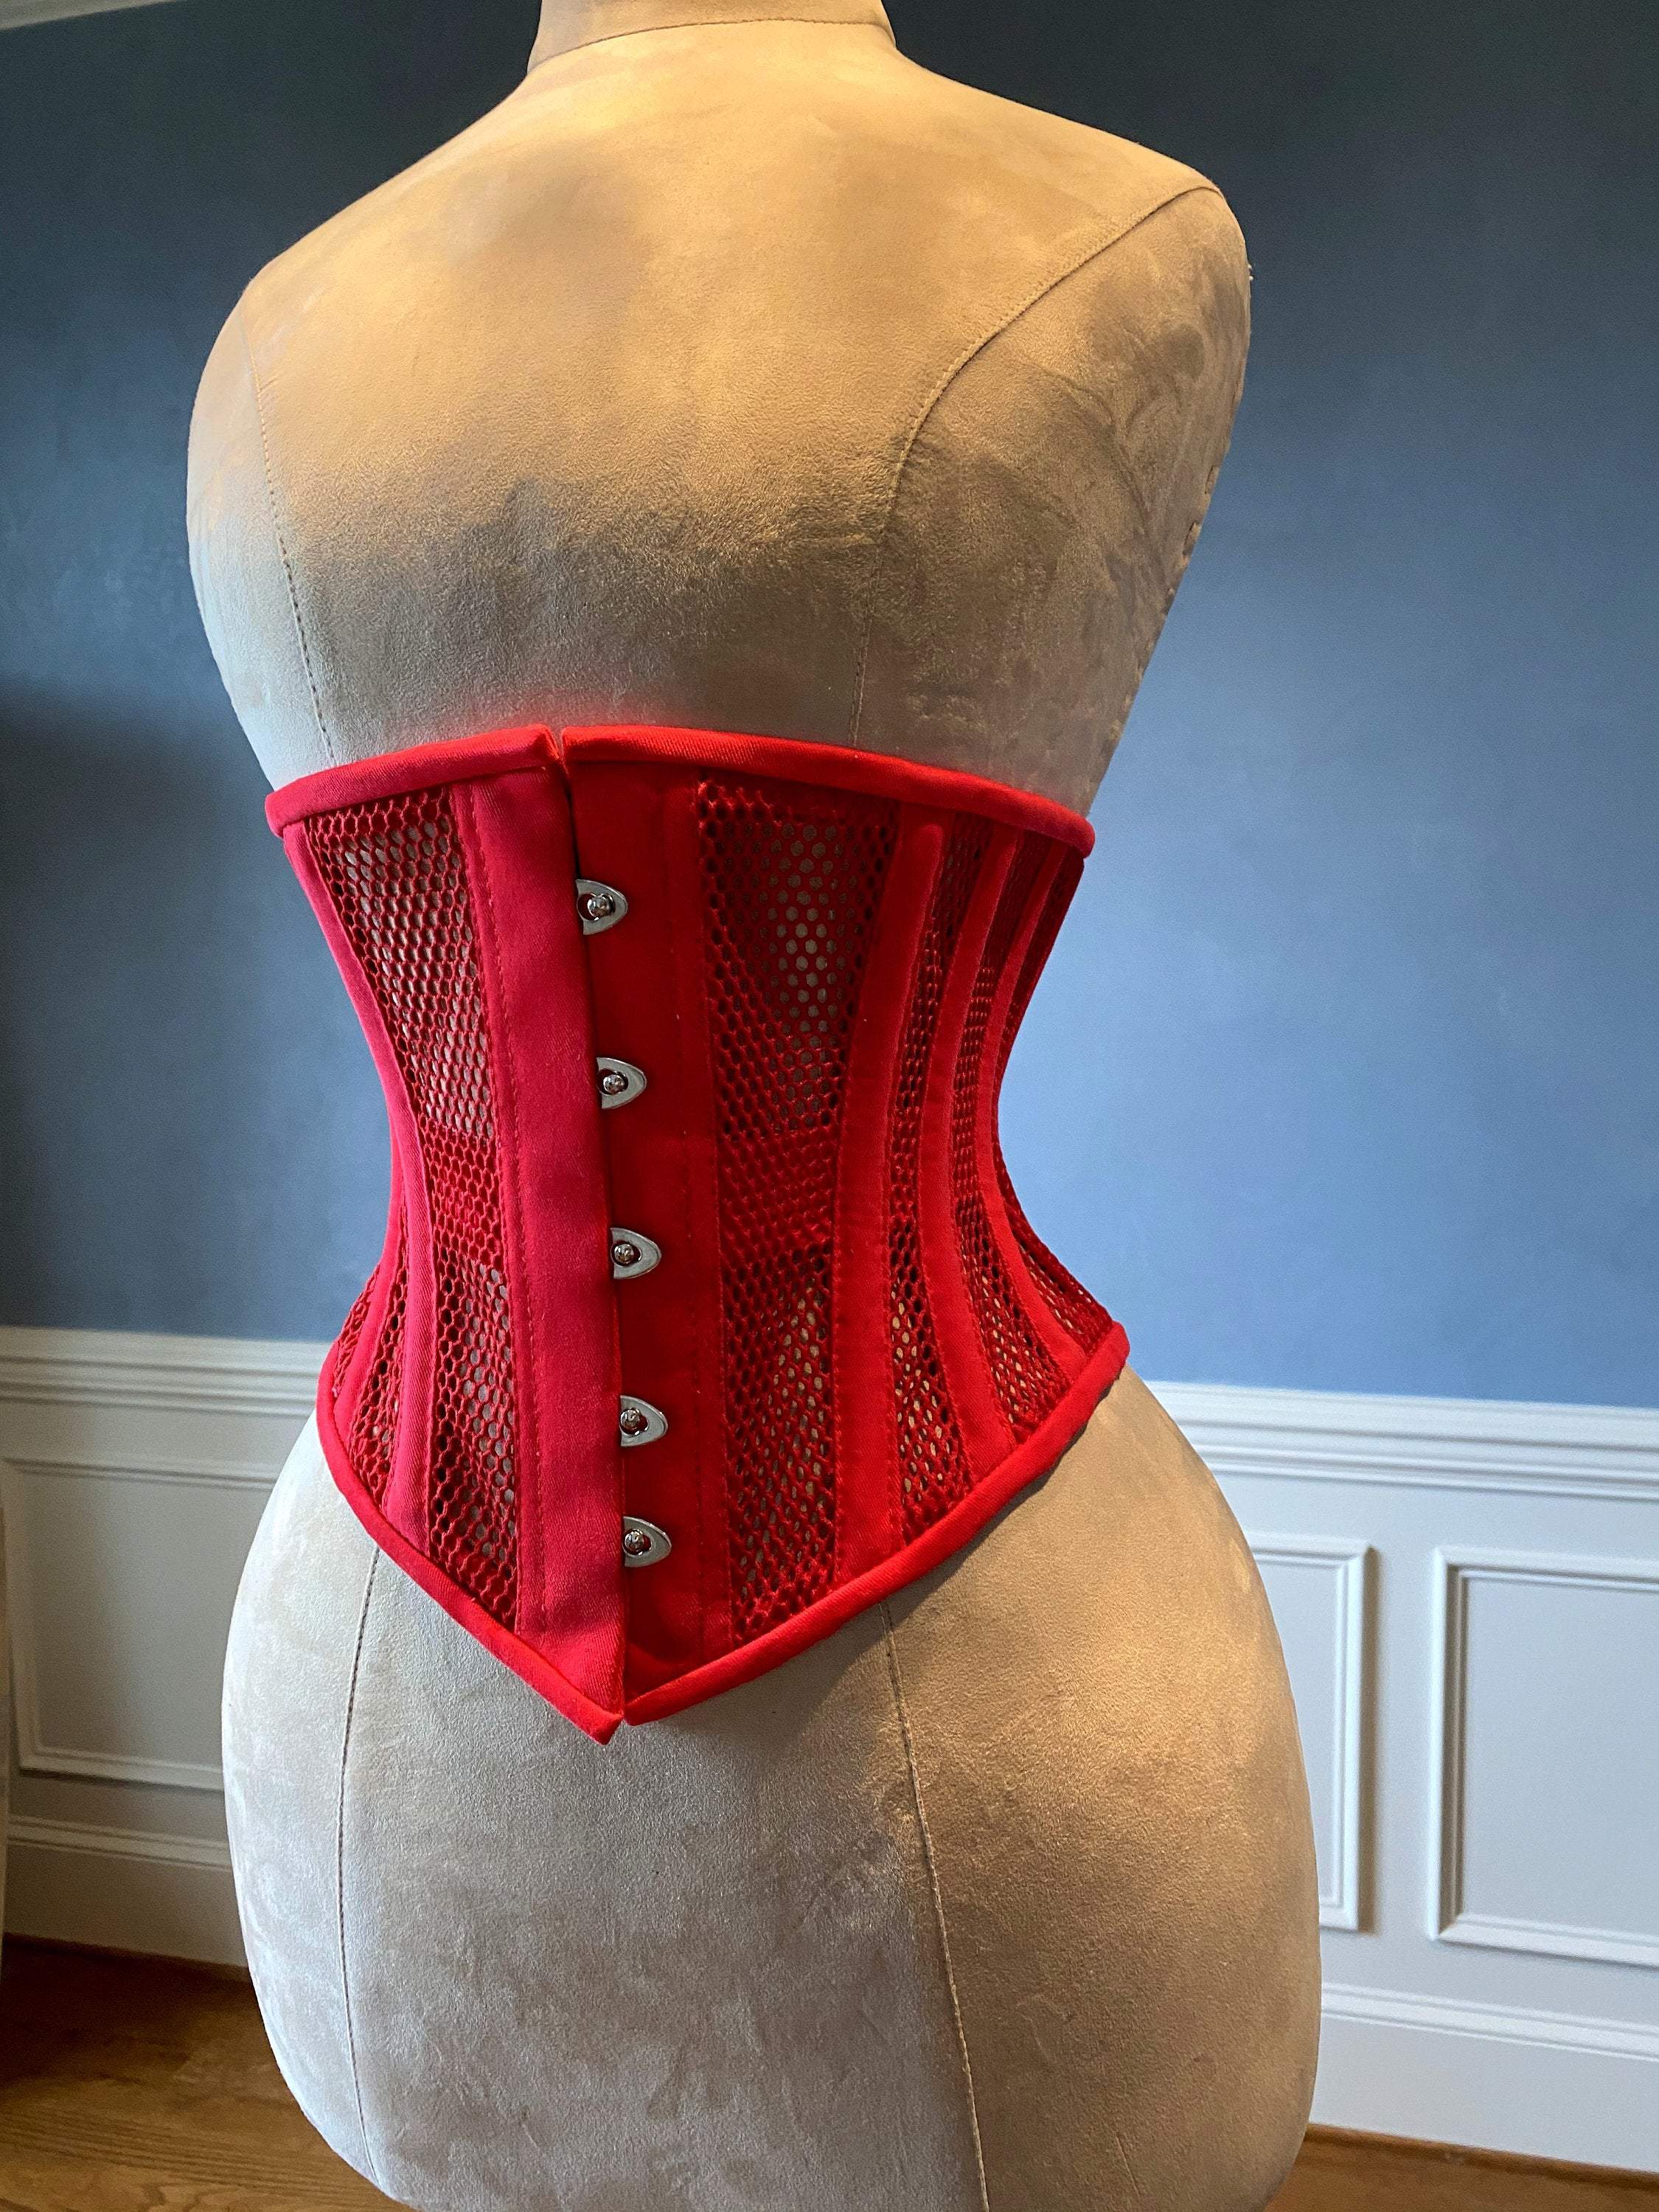 Real steel boned underbust underwear red corset from transparent